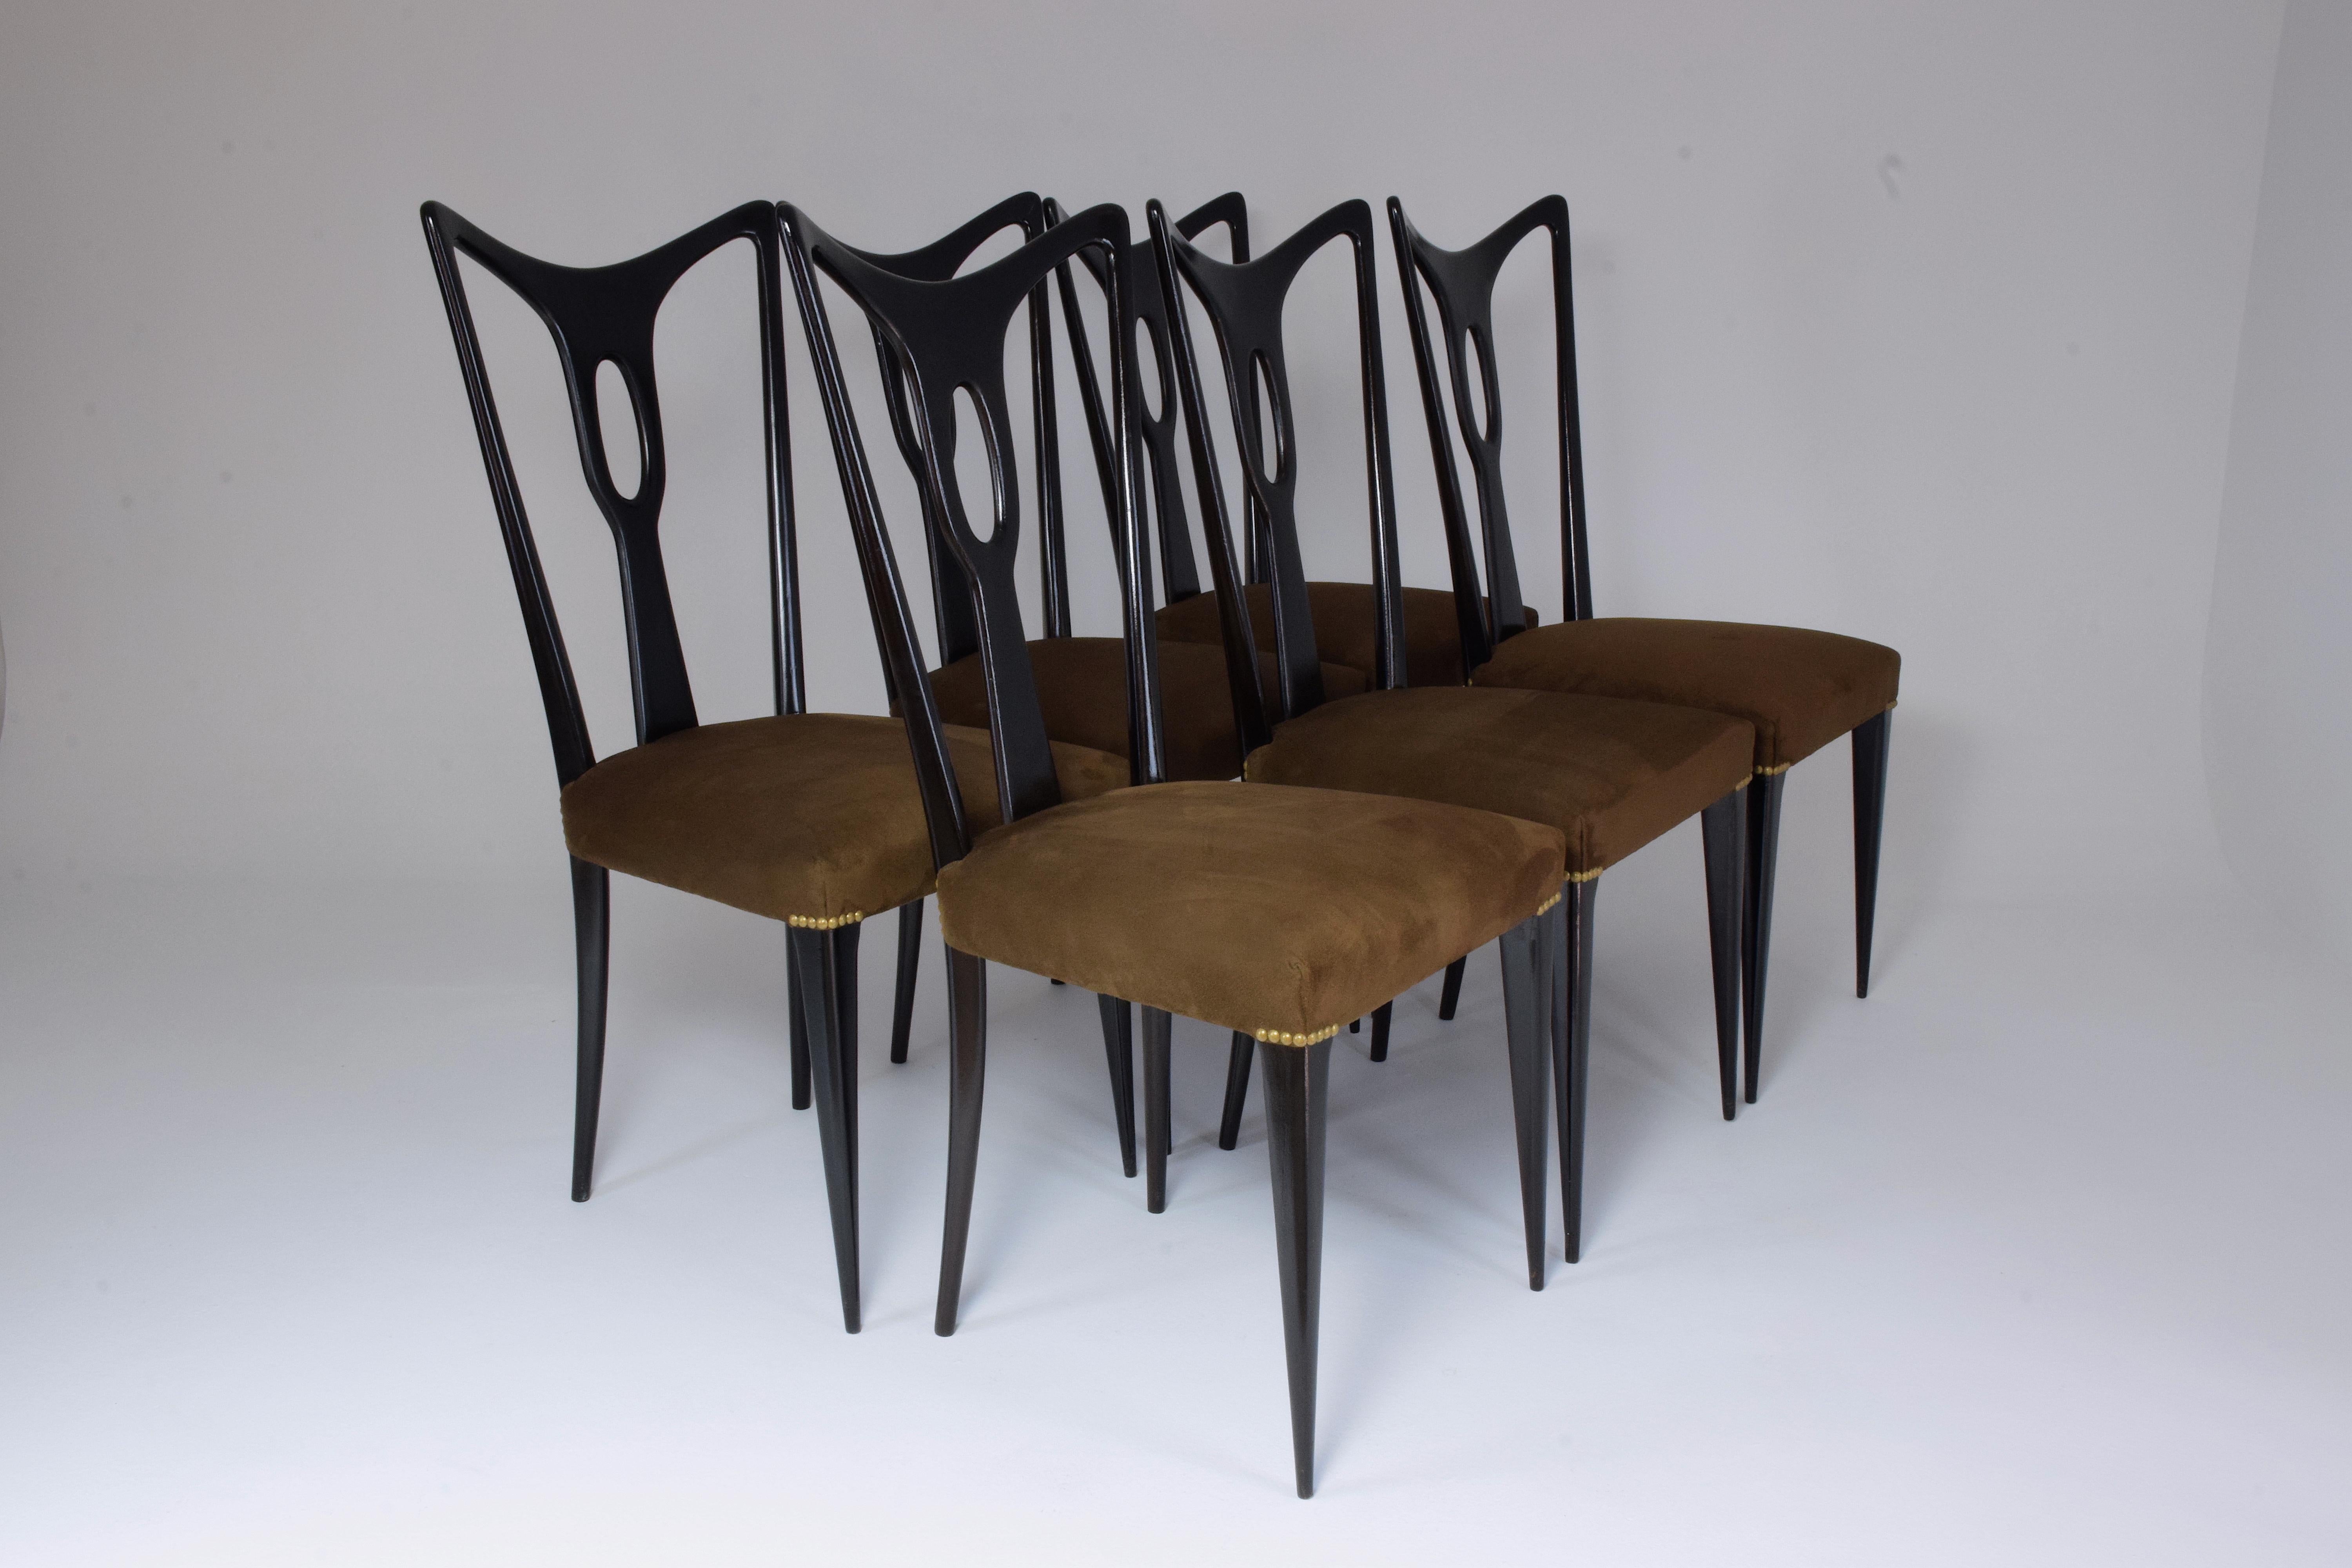 20th Century Italian Vintage Dining Chairs Attributed to Guglielmo Ulrich, Set of Six, 1940s